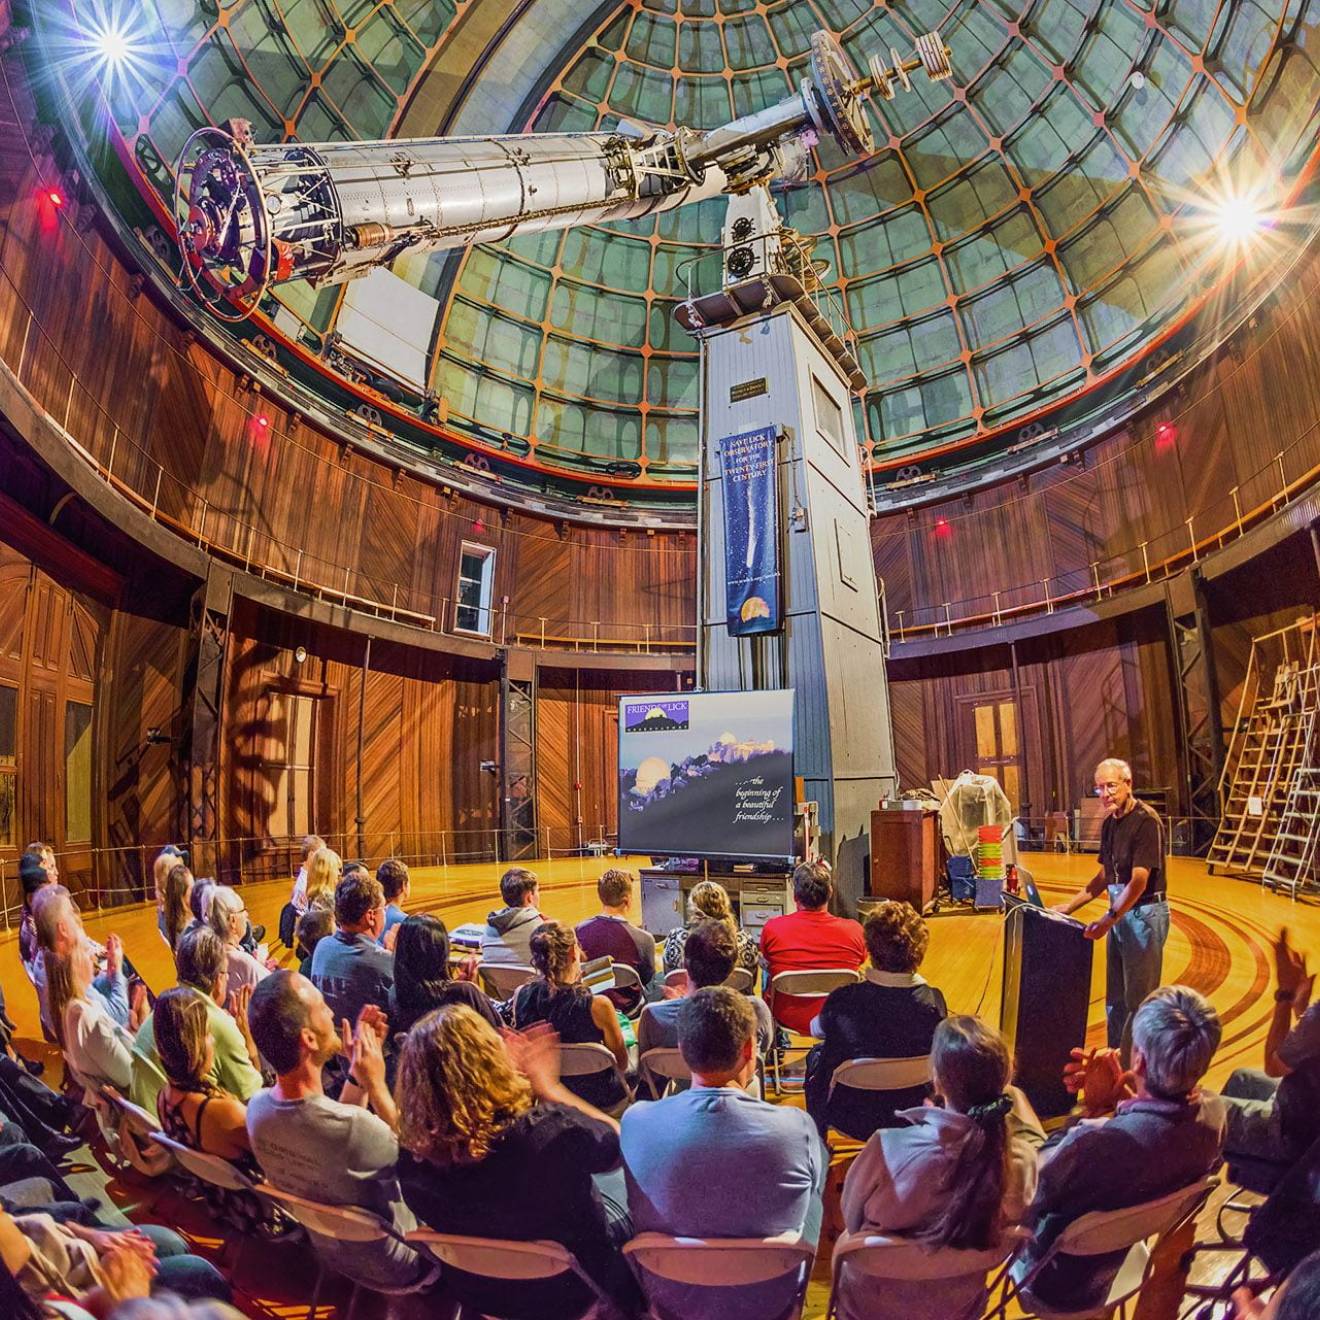 A presentation inside Lick Observatory, telescope visible, taken from a fish-angle lens